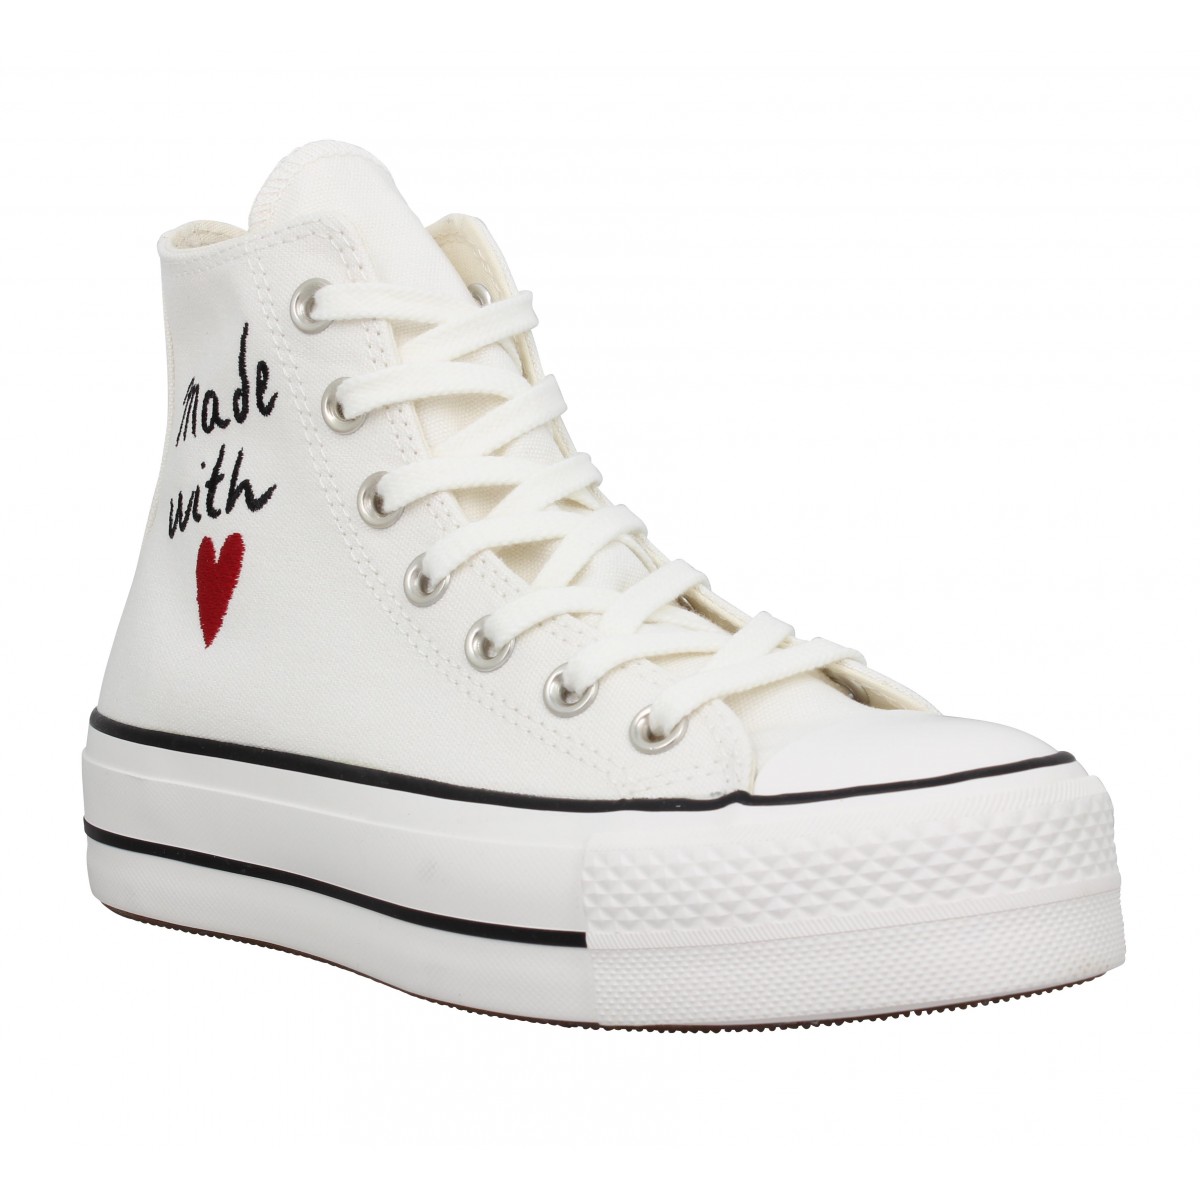 Chaussures Converse ct all star lift hi valentine s day toile ...